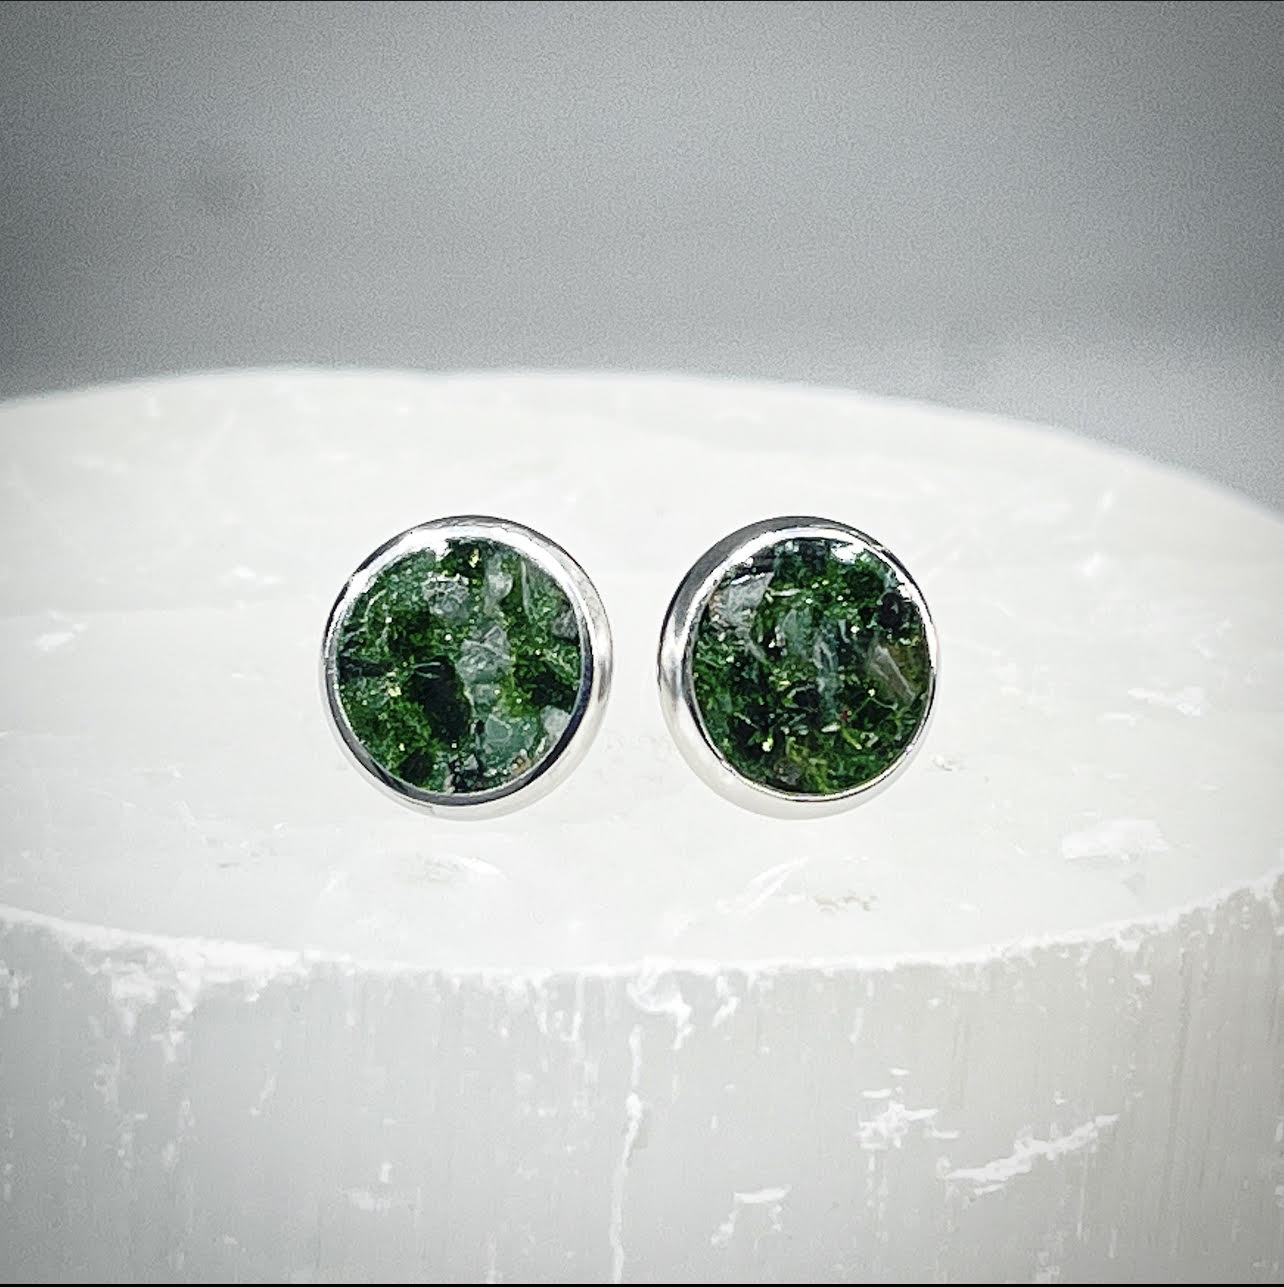 jade and emerald earrings surgical stainless steel